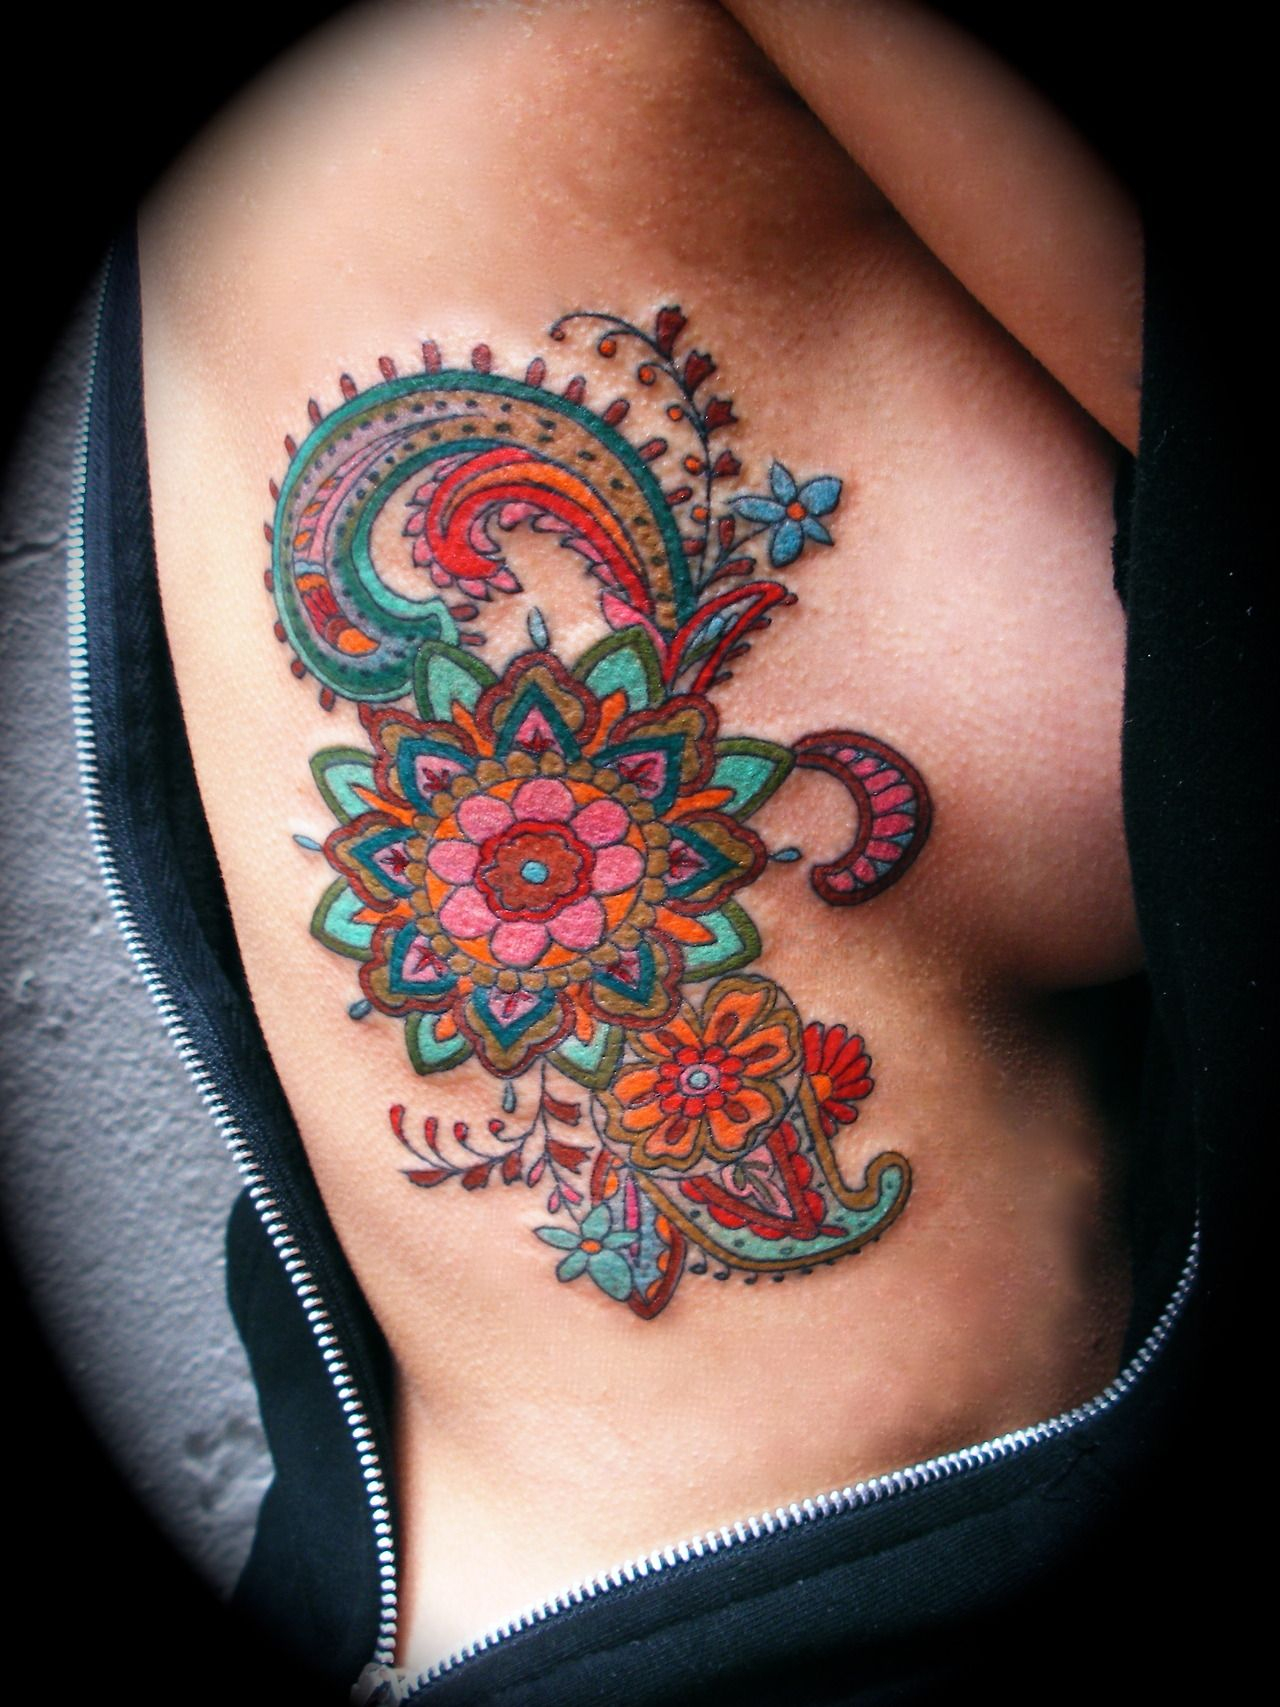 Paisley Bird Tattoo Colorful Henna Paisley Jacobean Style intended for dimensions 1280 X 1707